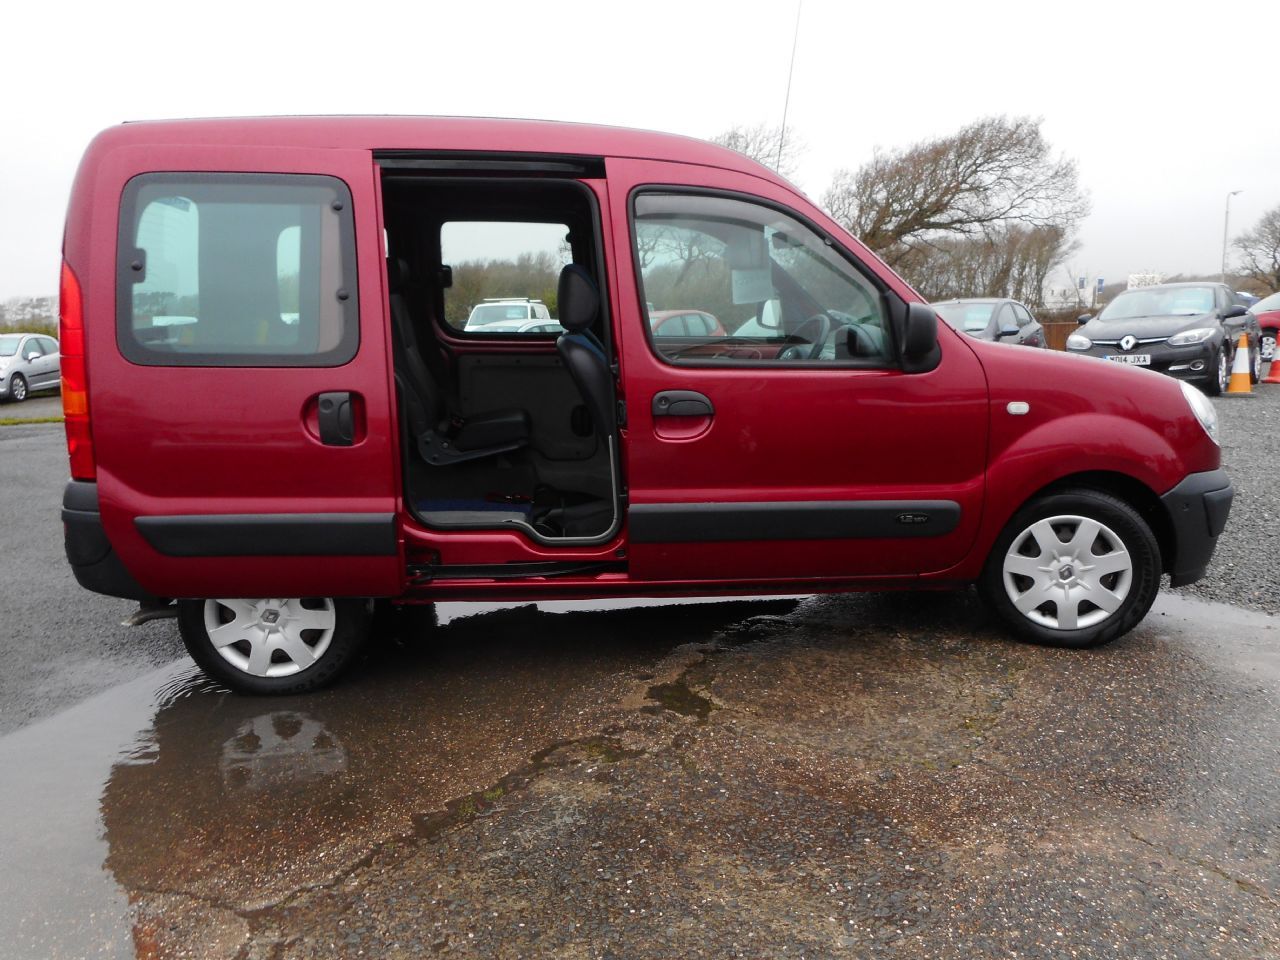 RENAULT KANGOO 1.2 16V Expression (2007) For Sale in